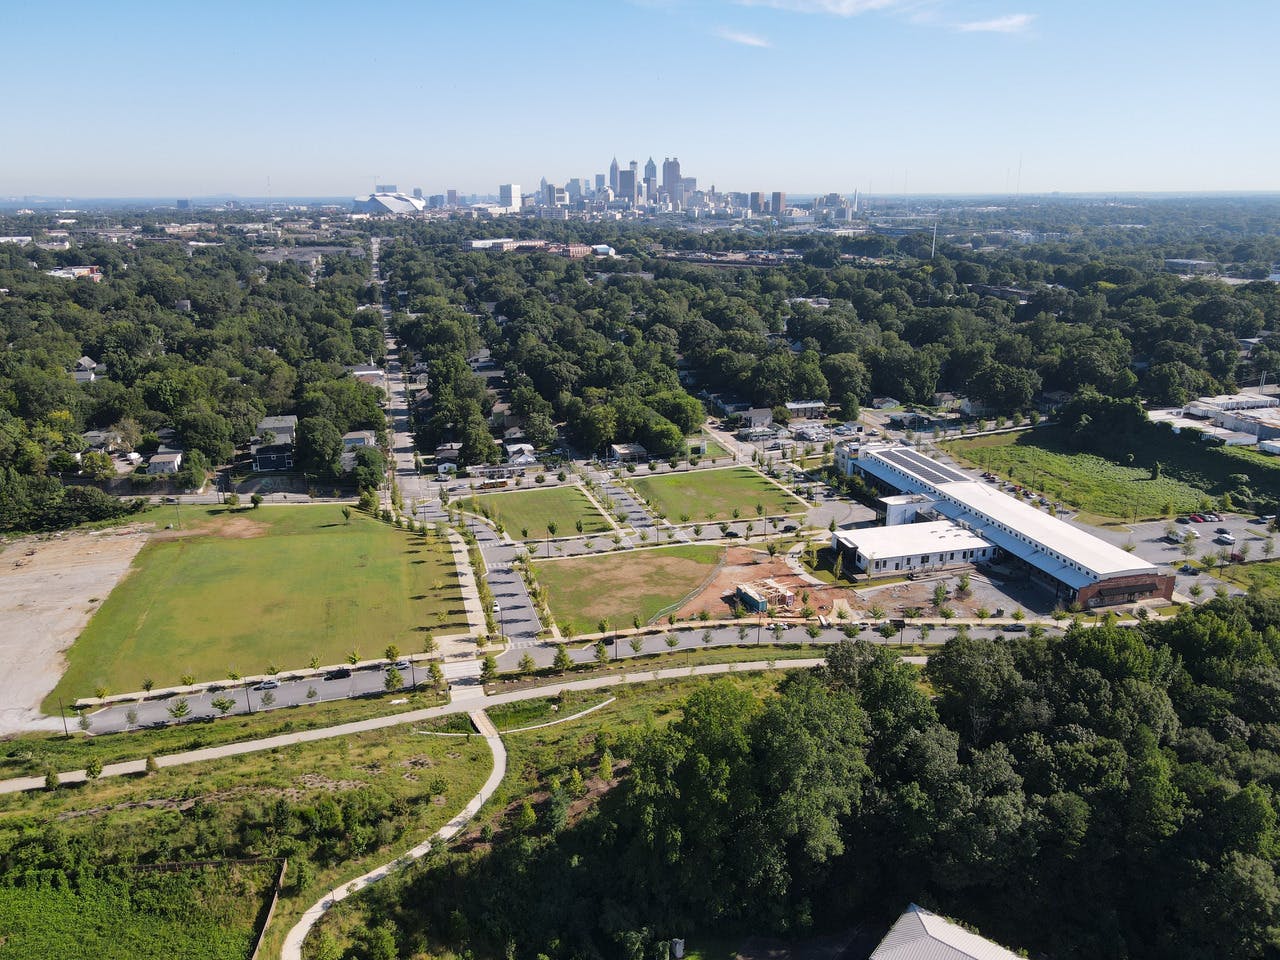 Bird's eye view of the Southside Trail, a large parcel of land, and several trees with the skyline in the distance.